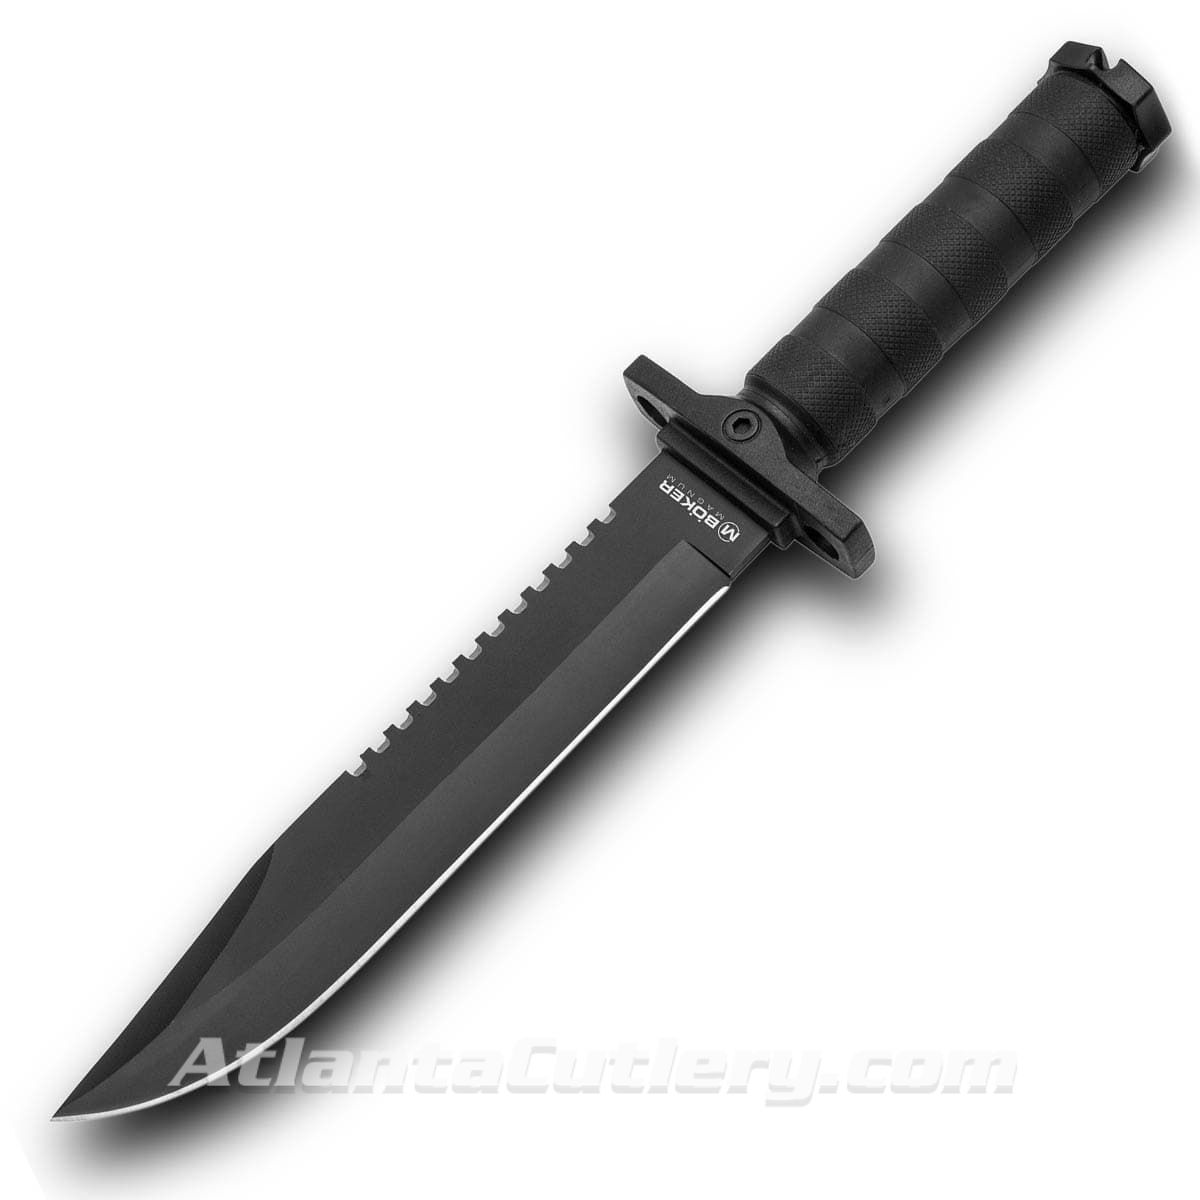 Boker Magnum John Jay Survival Knife has black 7Cr17MoV steel Bowie blade with sawback, rubber coated handle and holes in guard